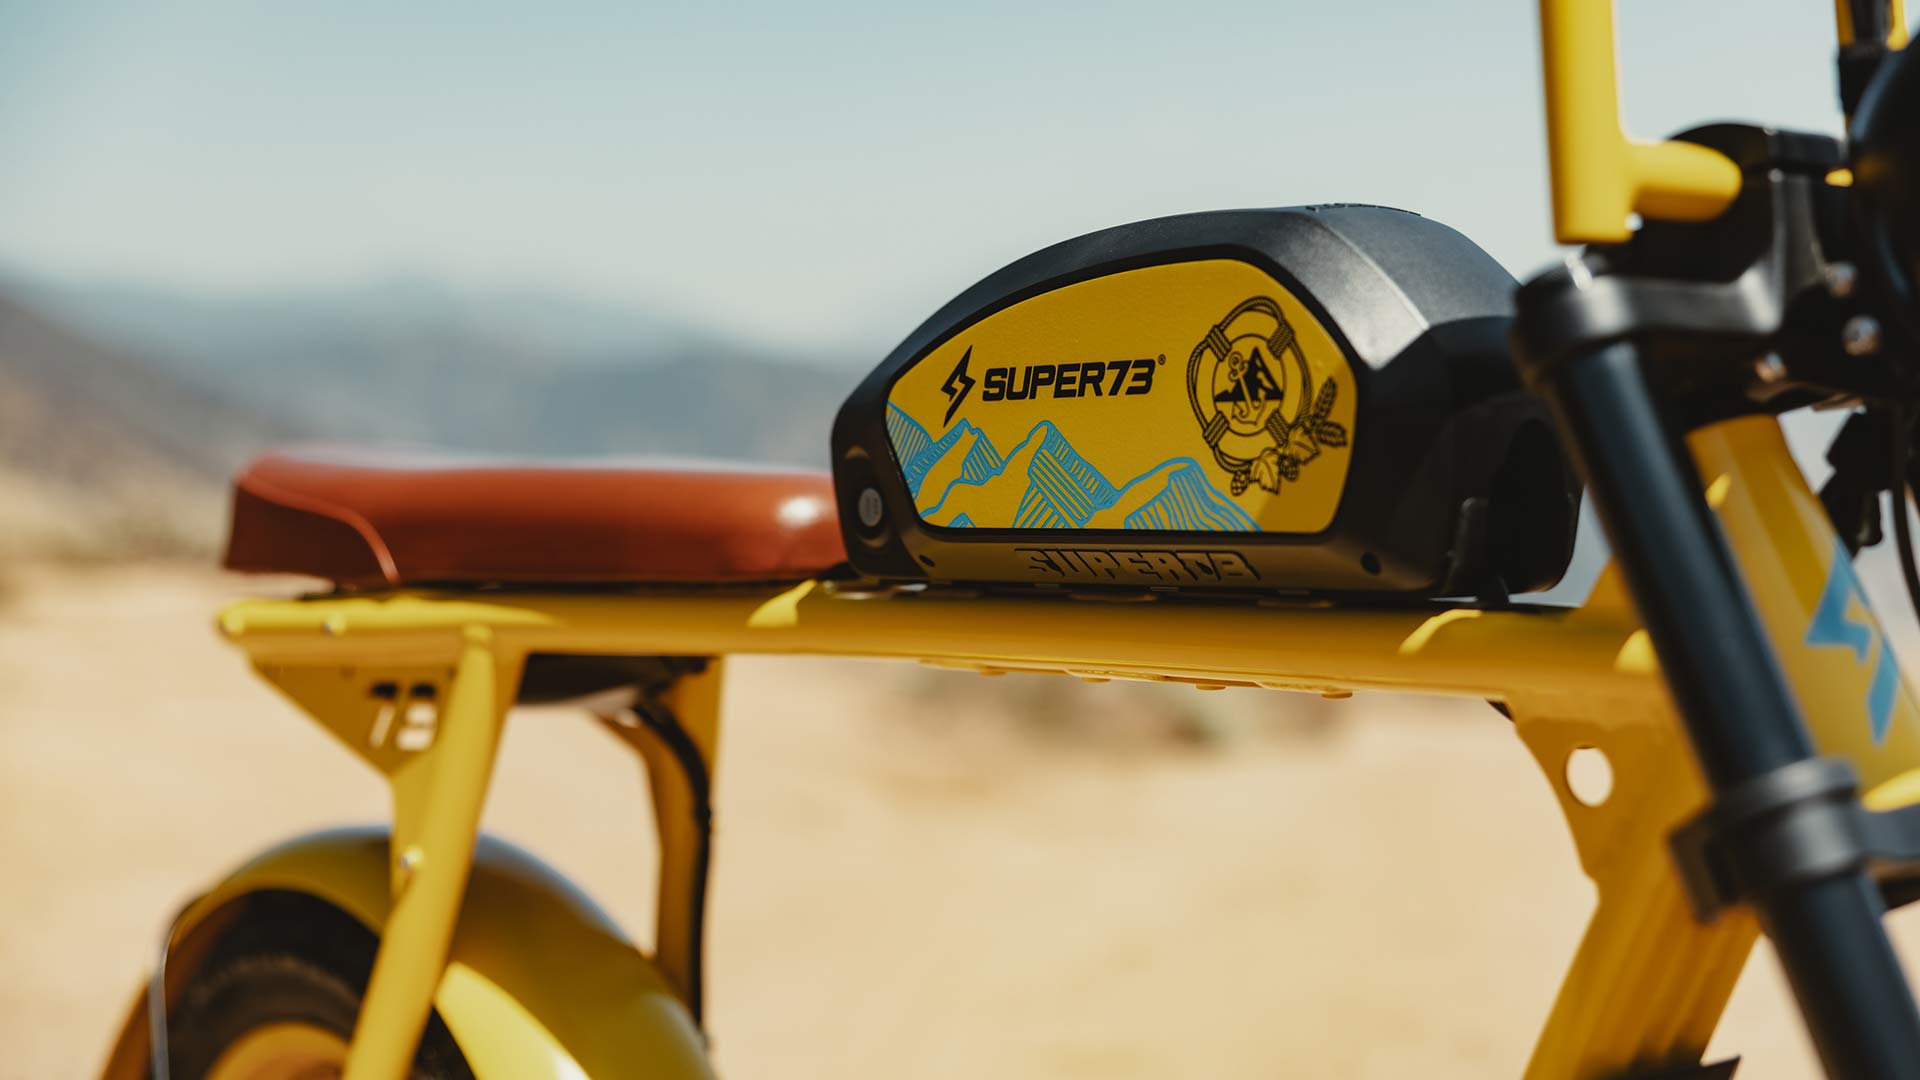 Close-up image of the custom Pacifico x SUPER73-S2 bike battery with branded decals.